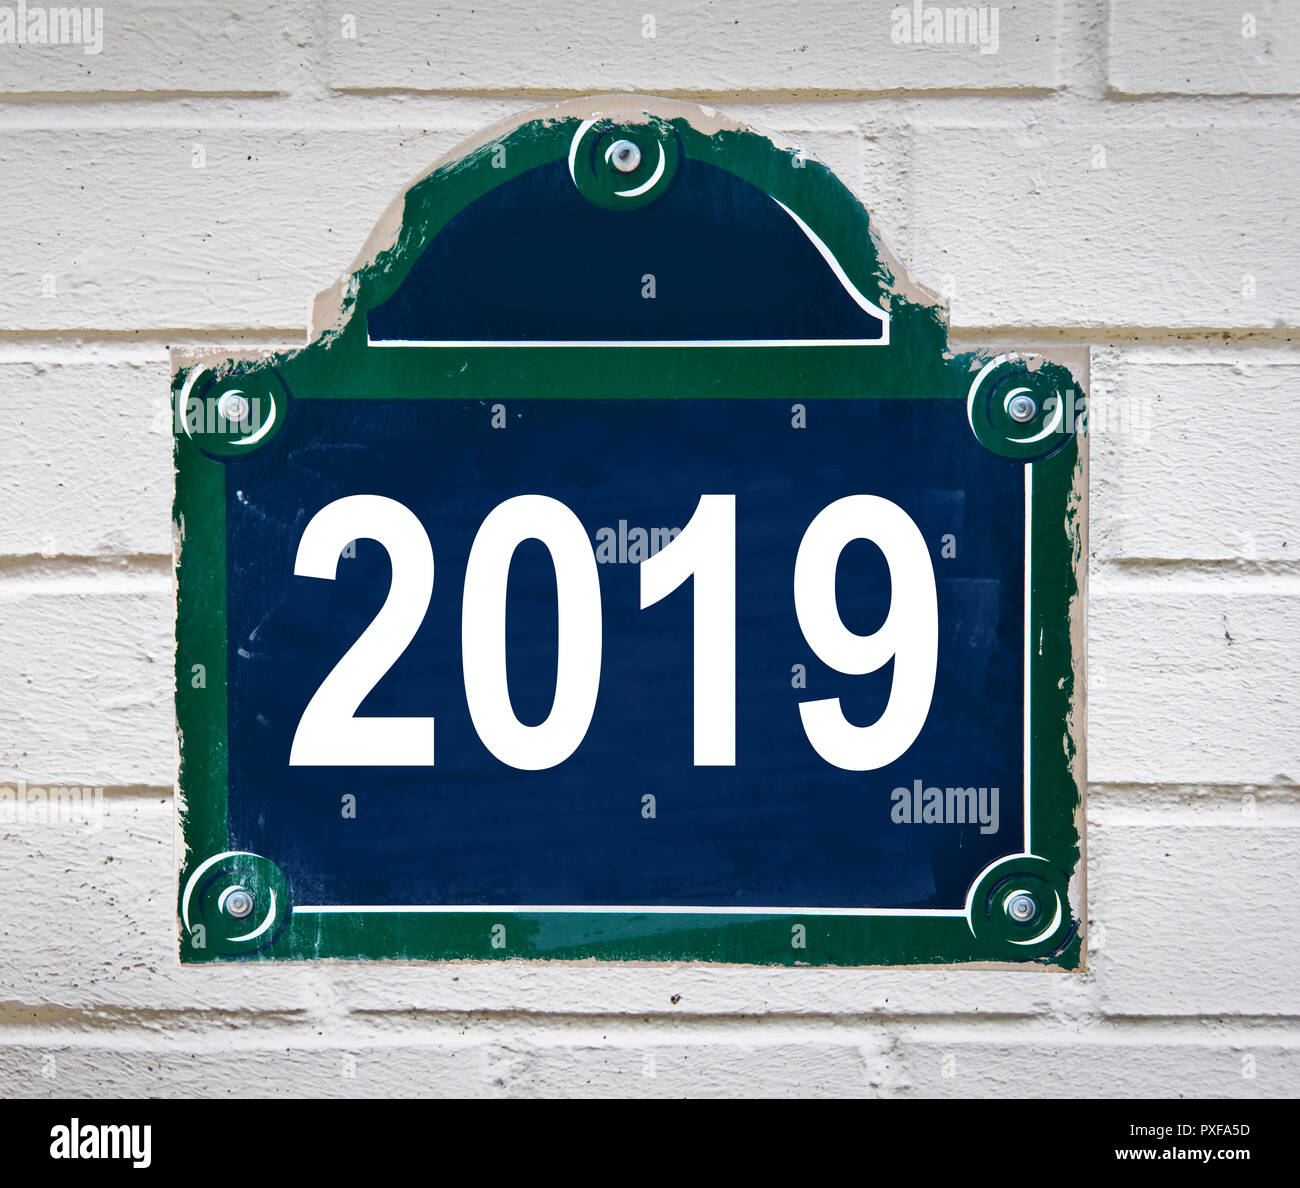 2019 written on a Paris street plate isolated on white background Stock Photo